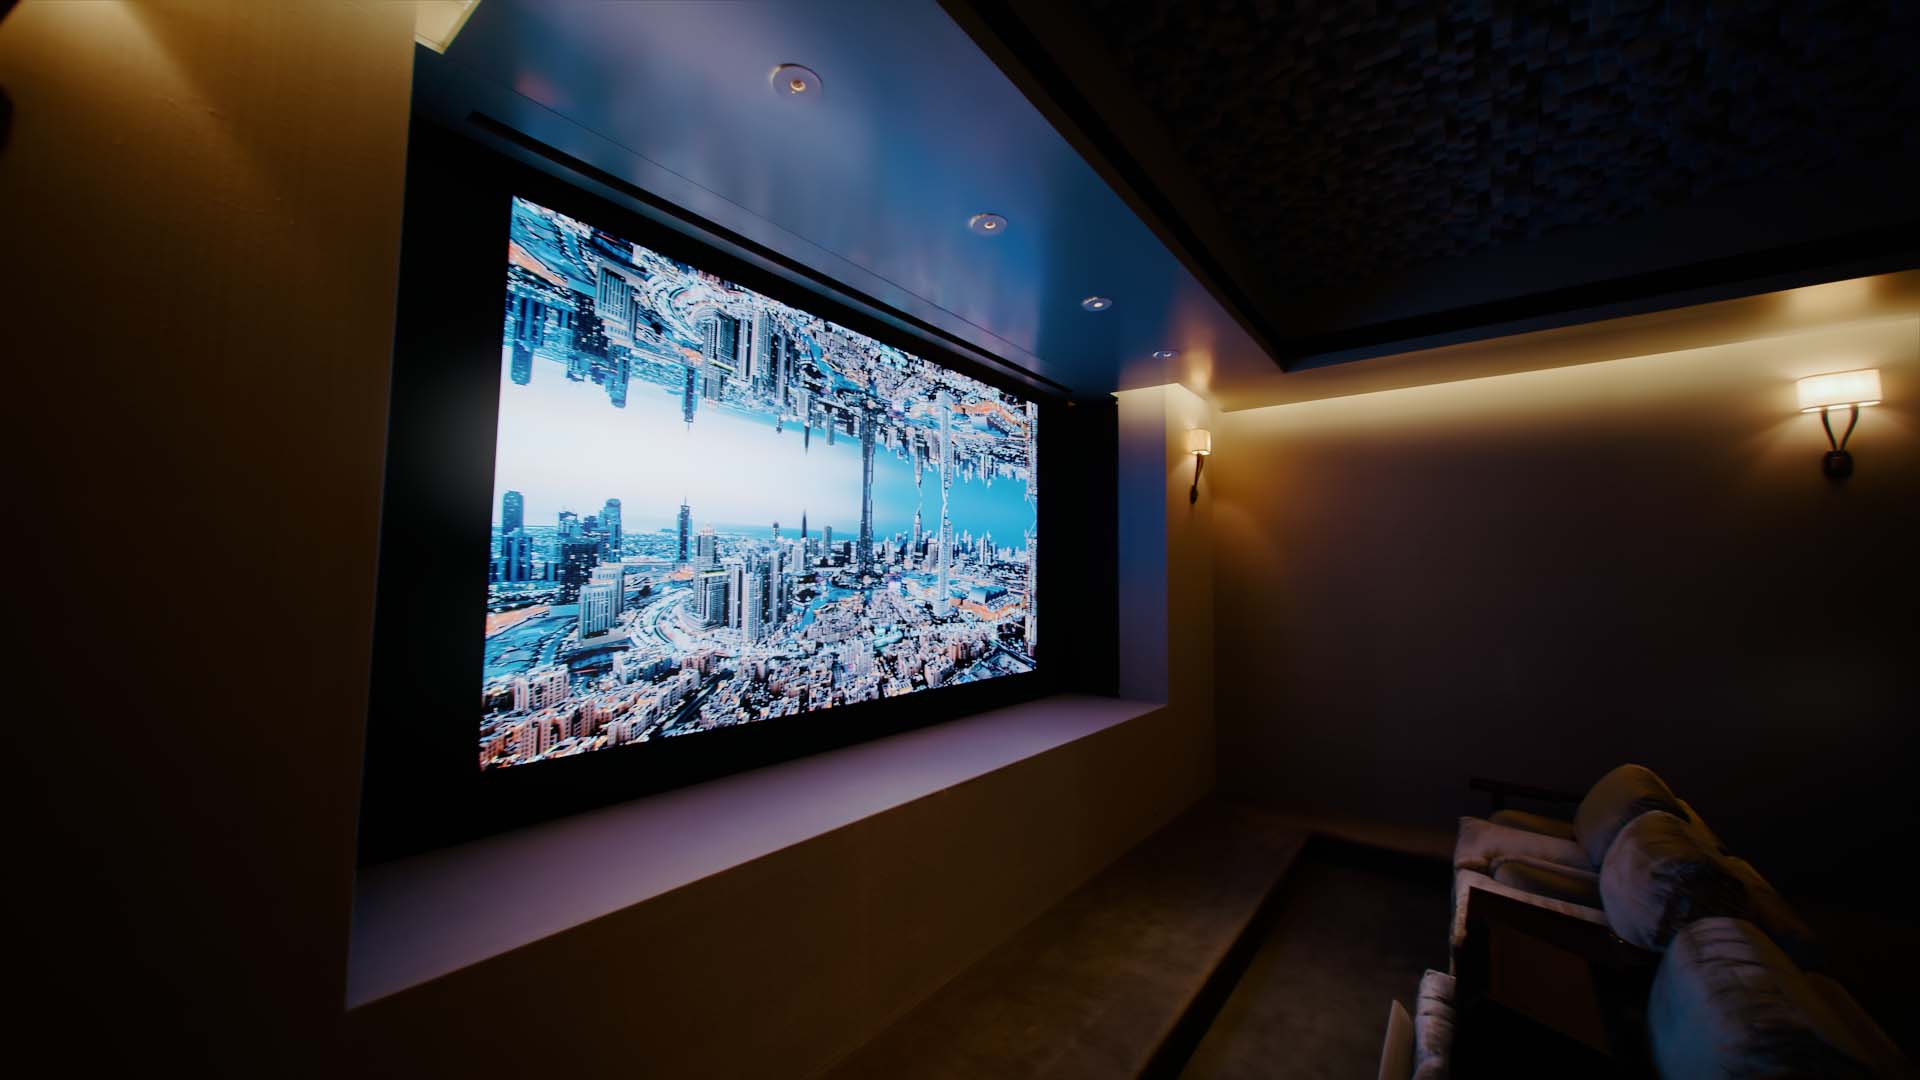 Samsung The Wall Micro-LED TV in a dark home theater set